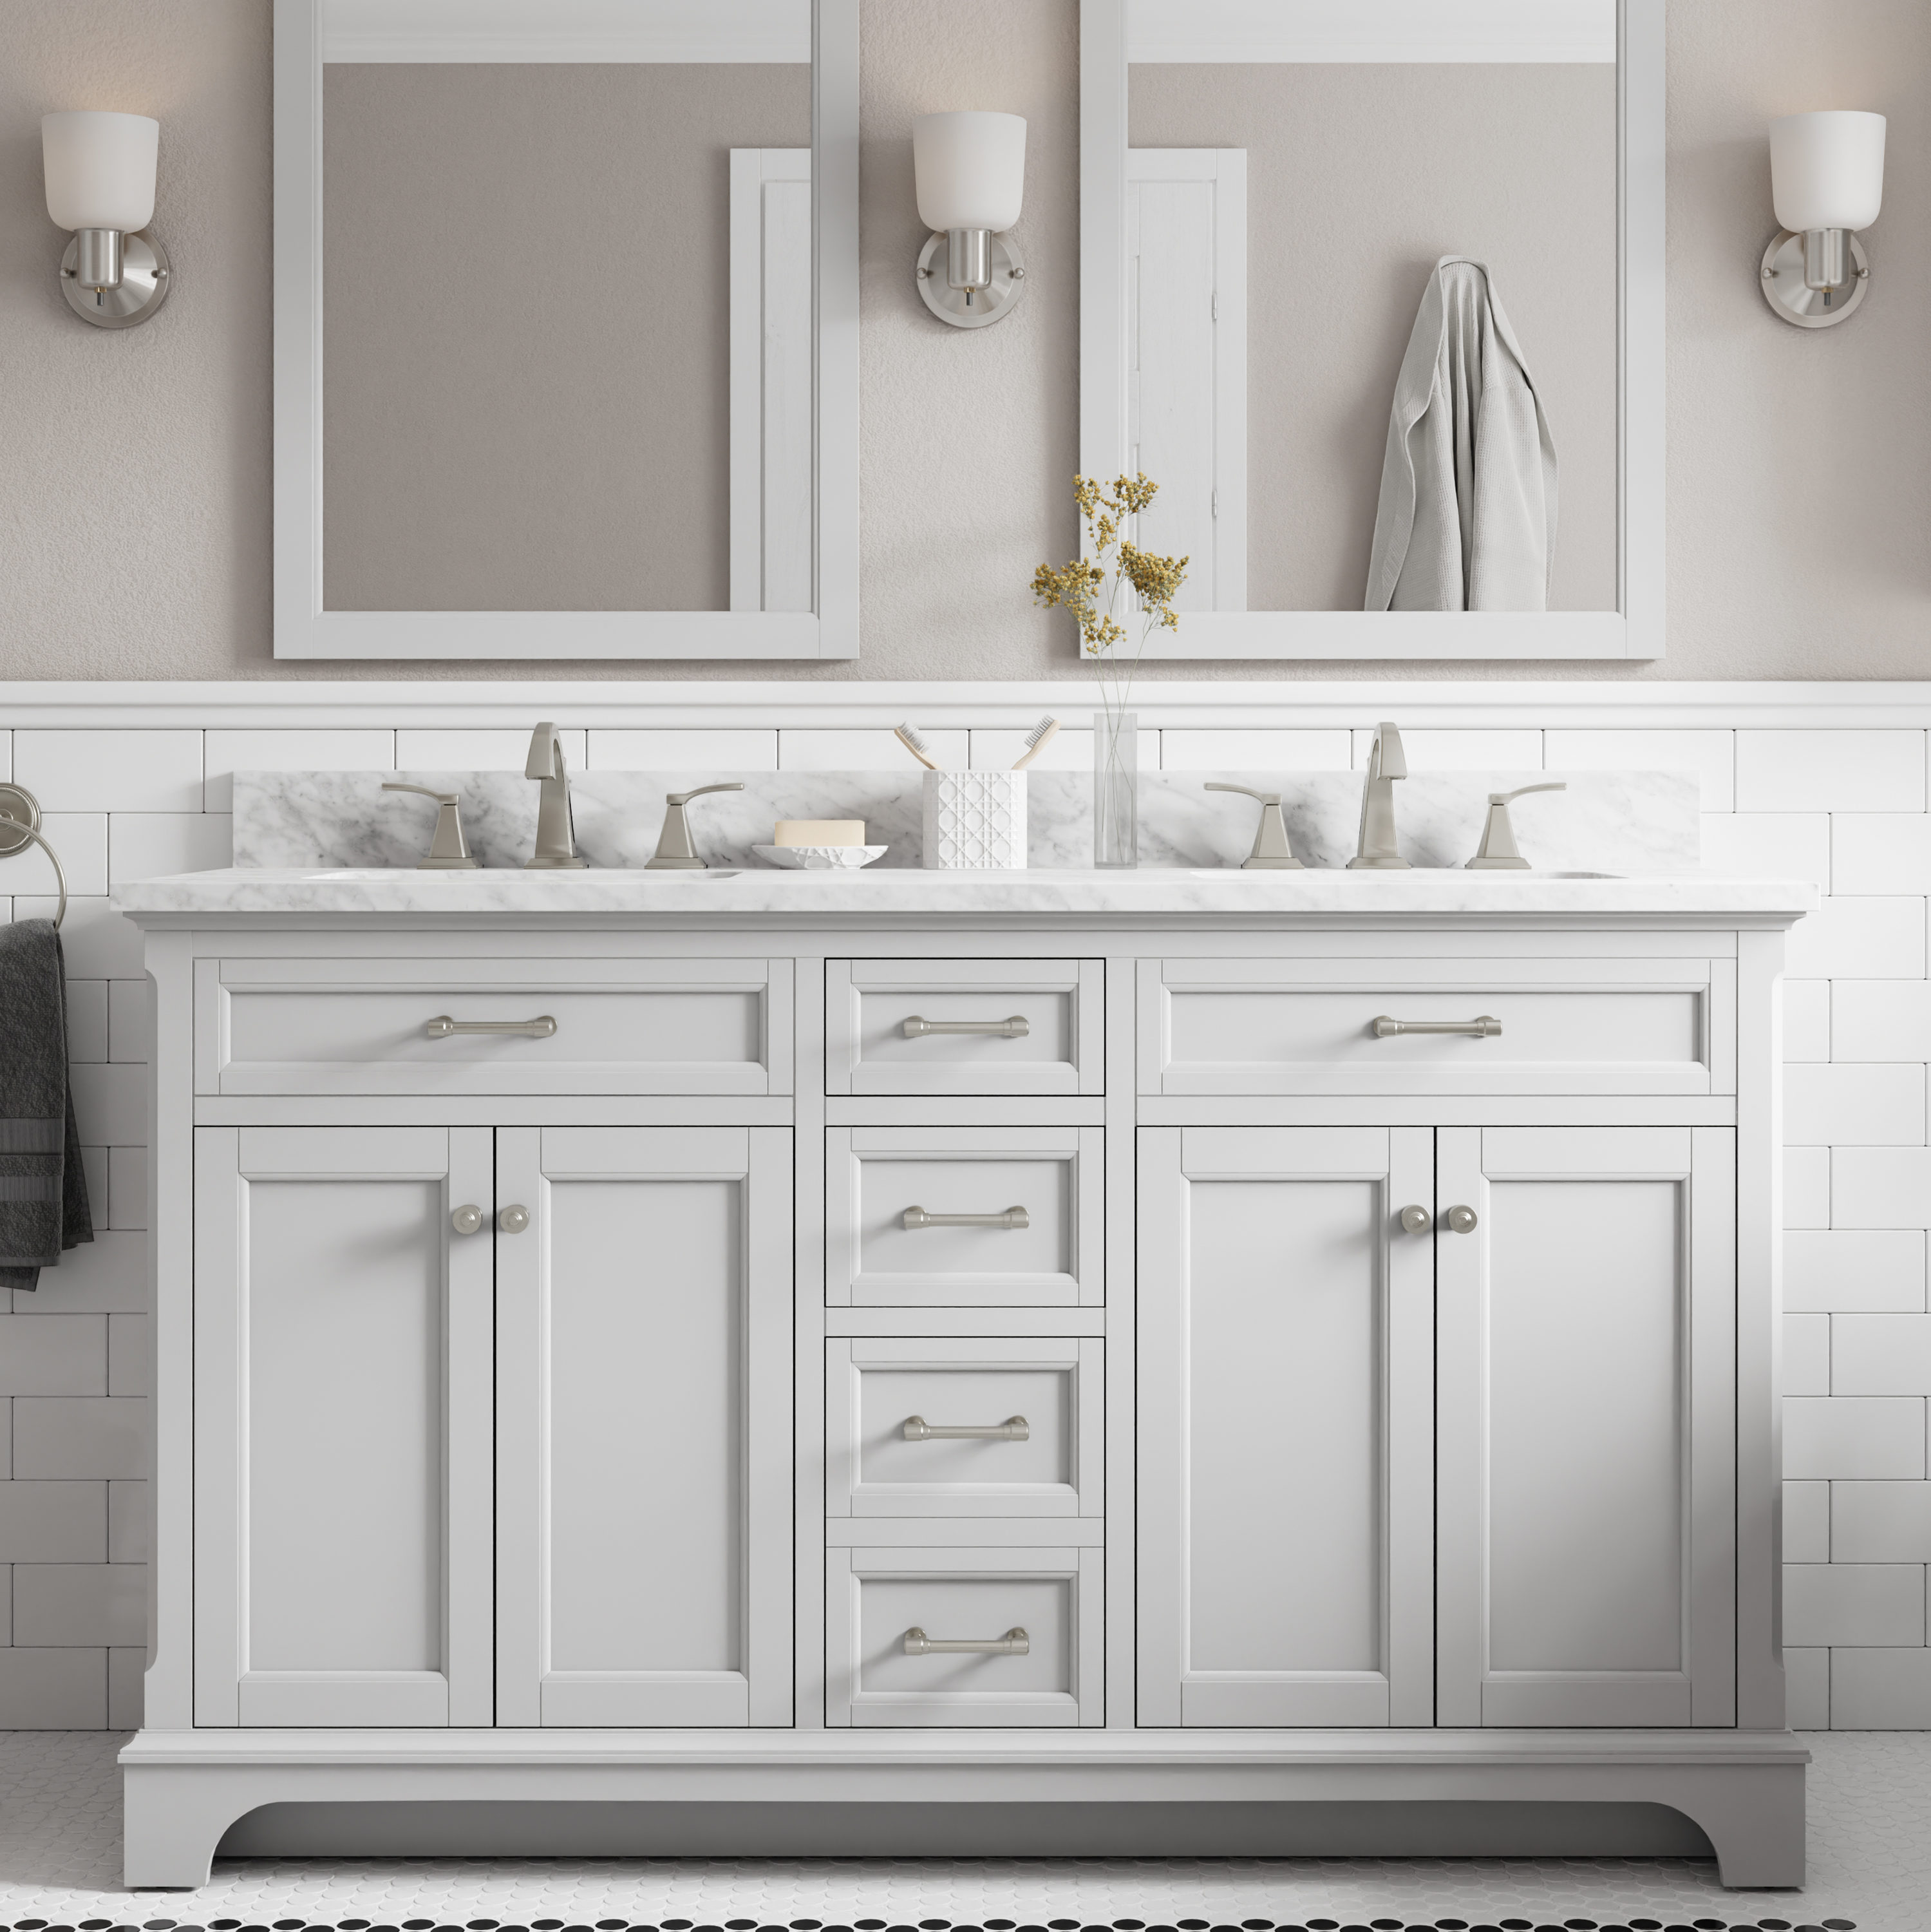 allen + roth Floating 60-in White Undermount Double Sink Floating Bathroom  Vanity with Natural Carrara Marble Top at